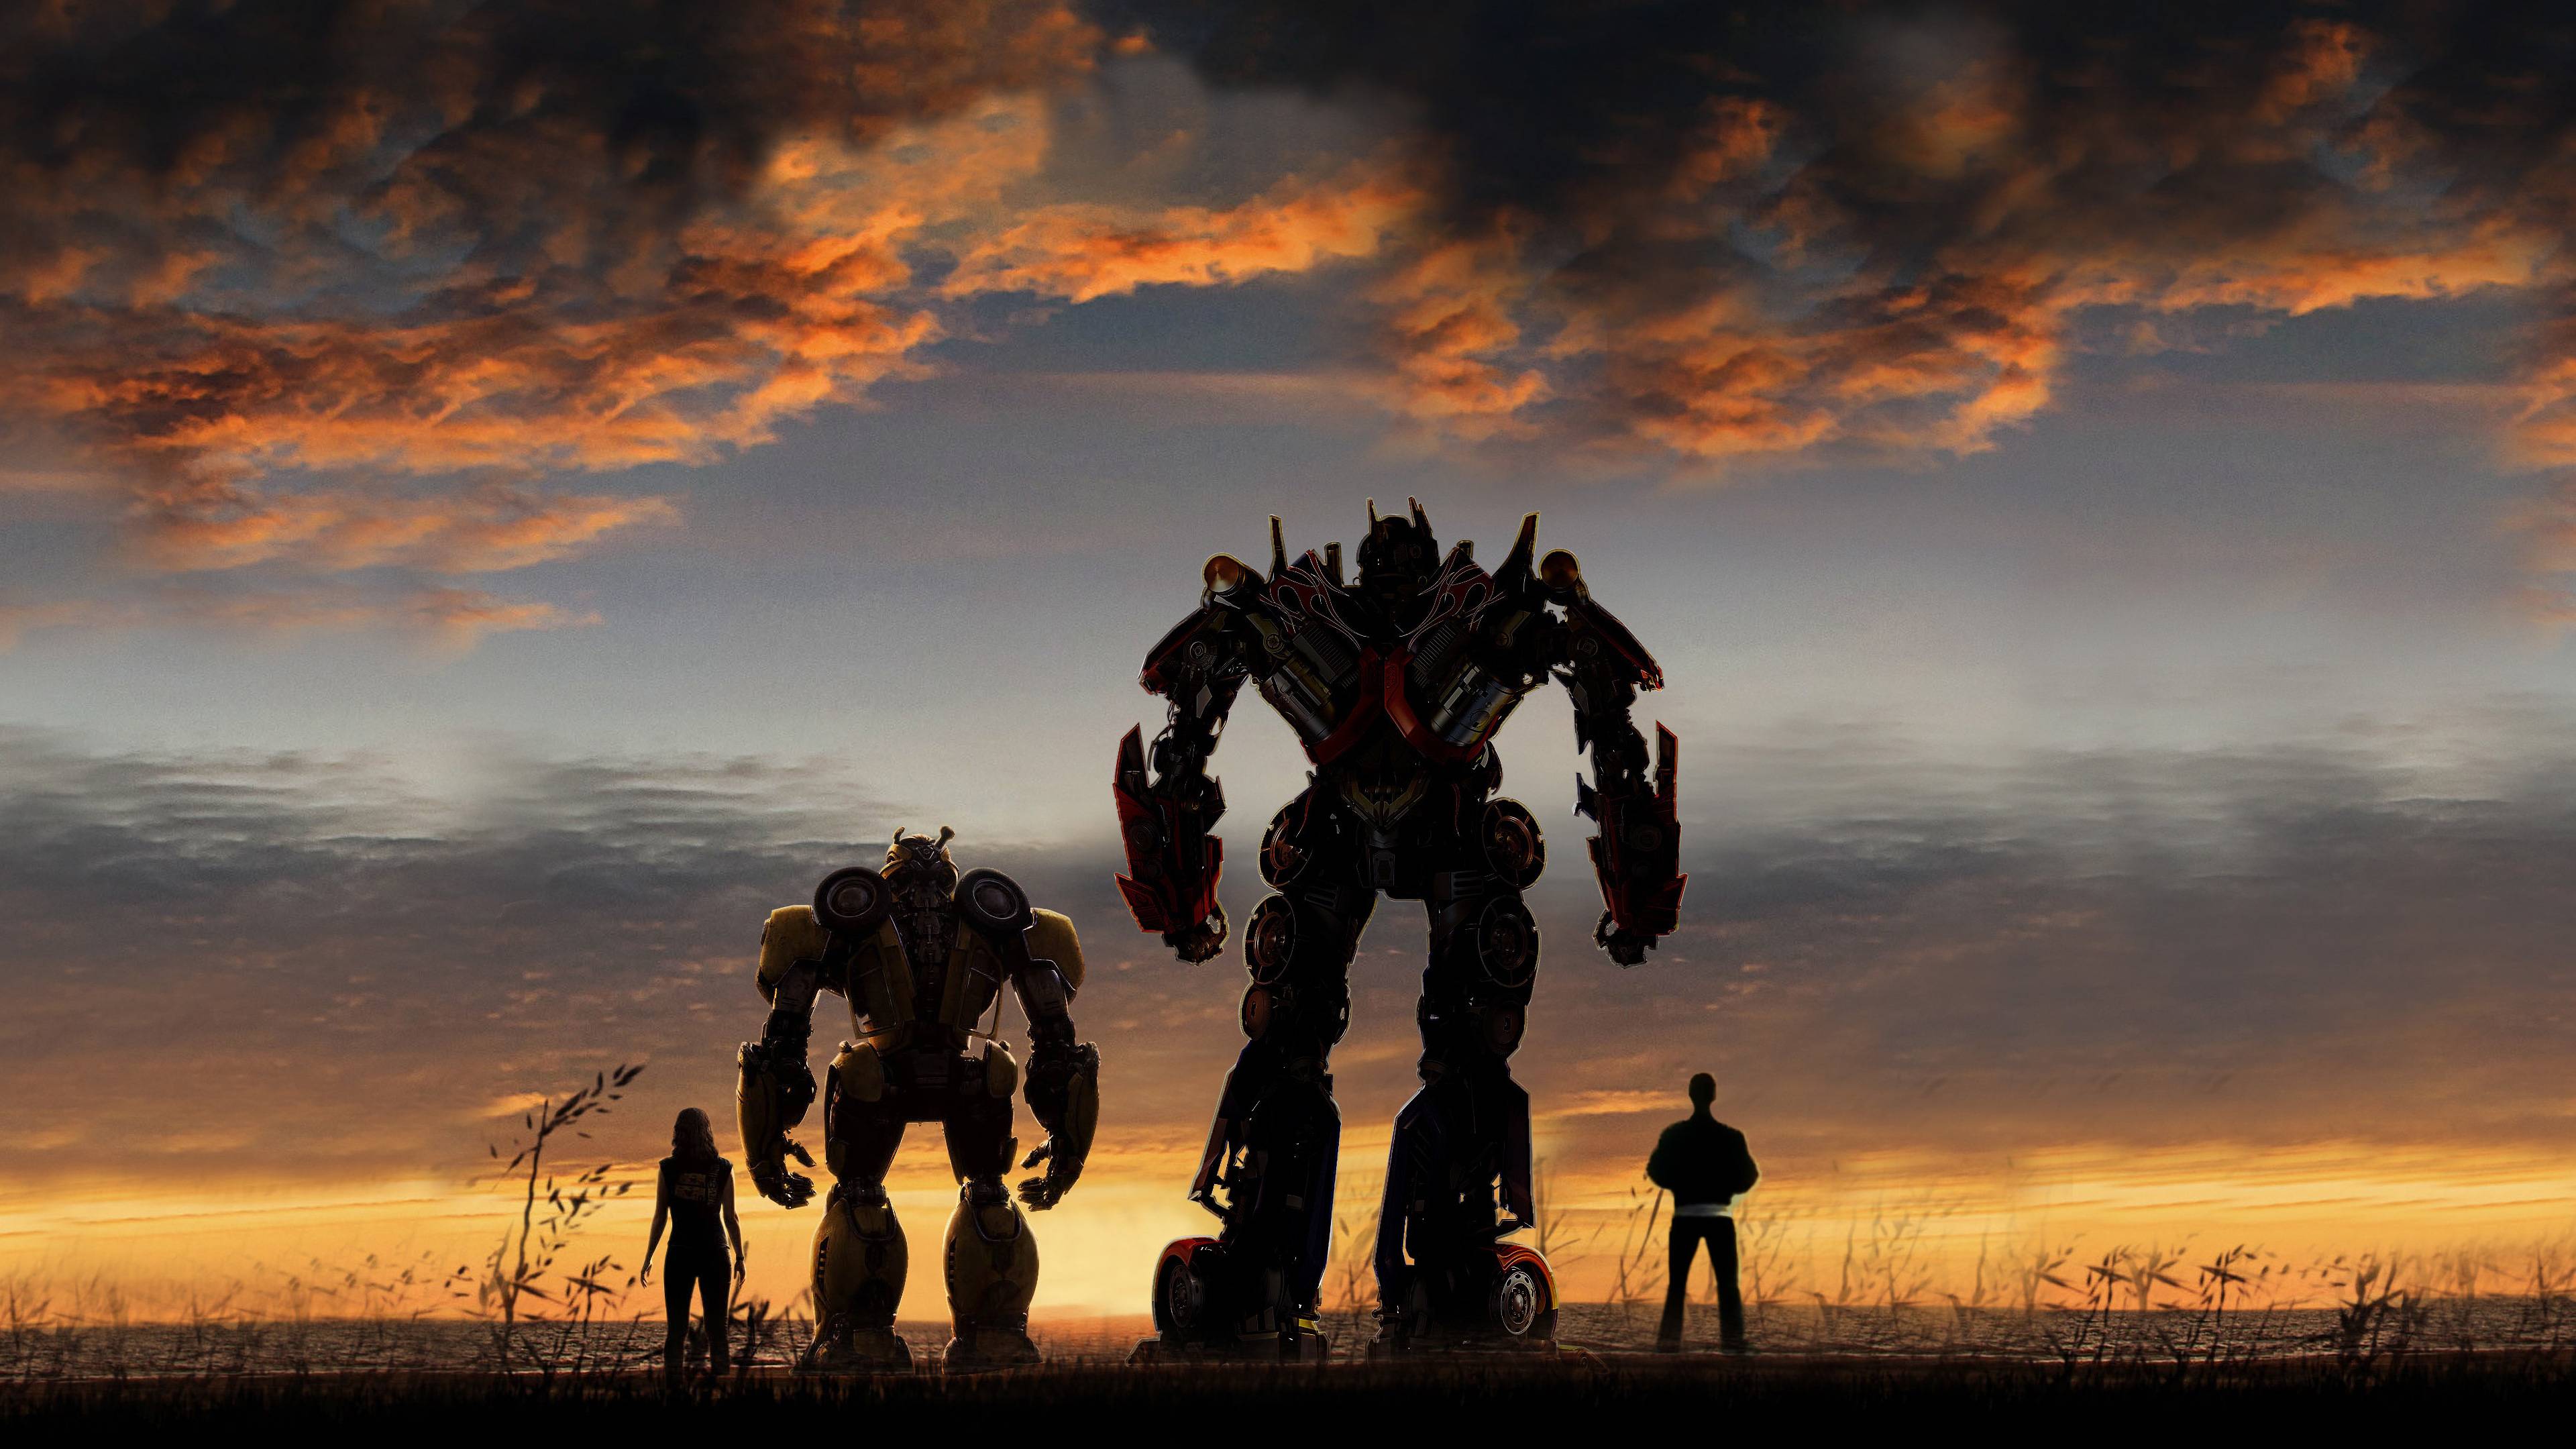 transformers 5 poster hd